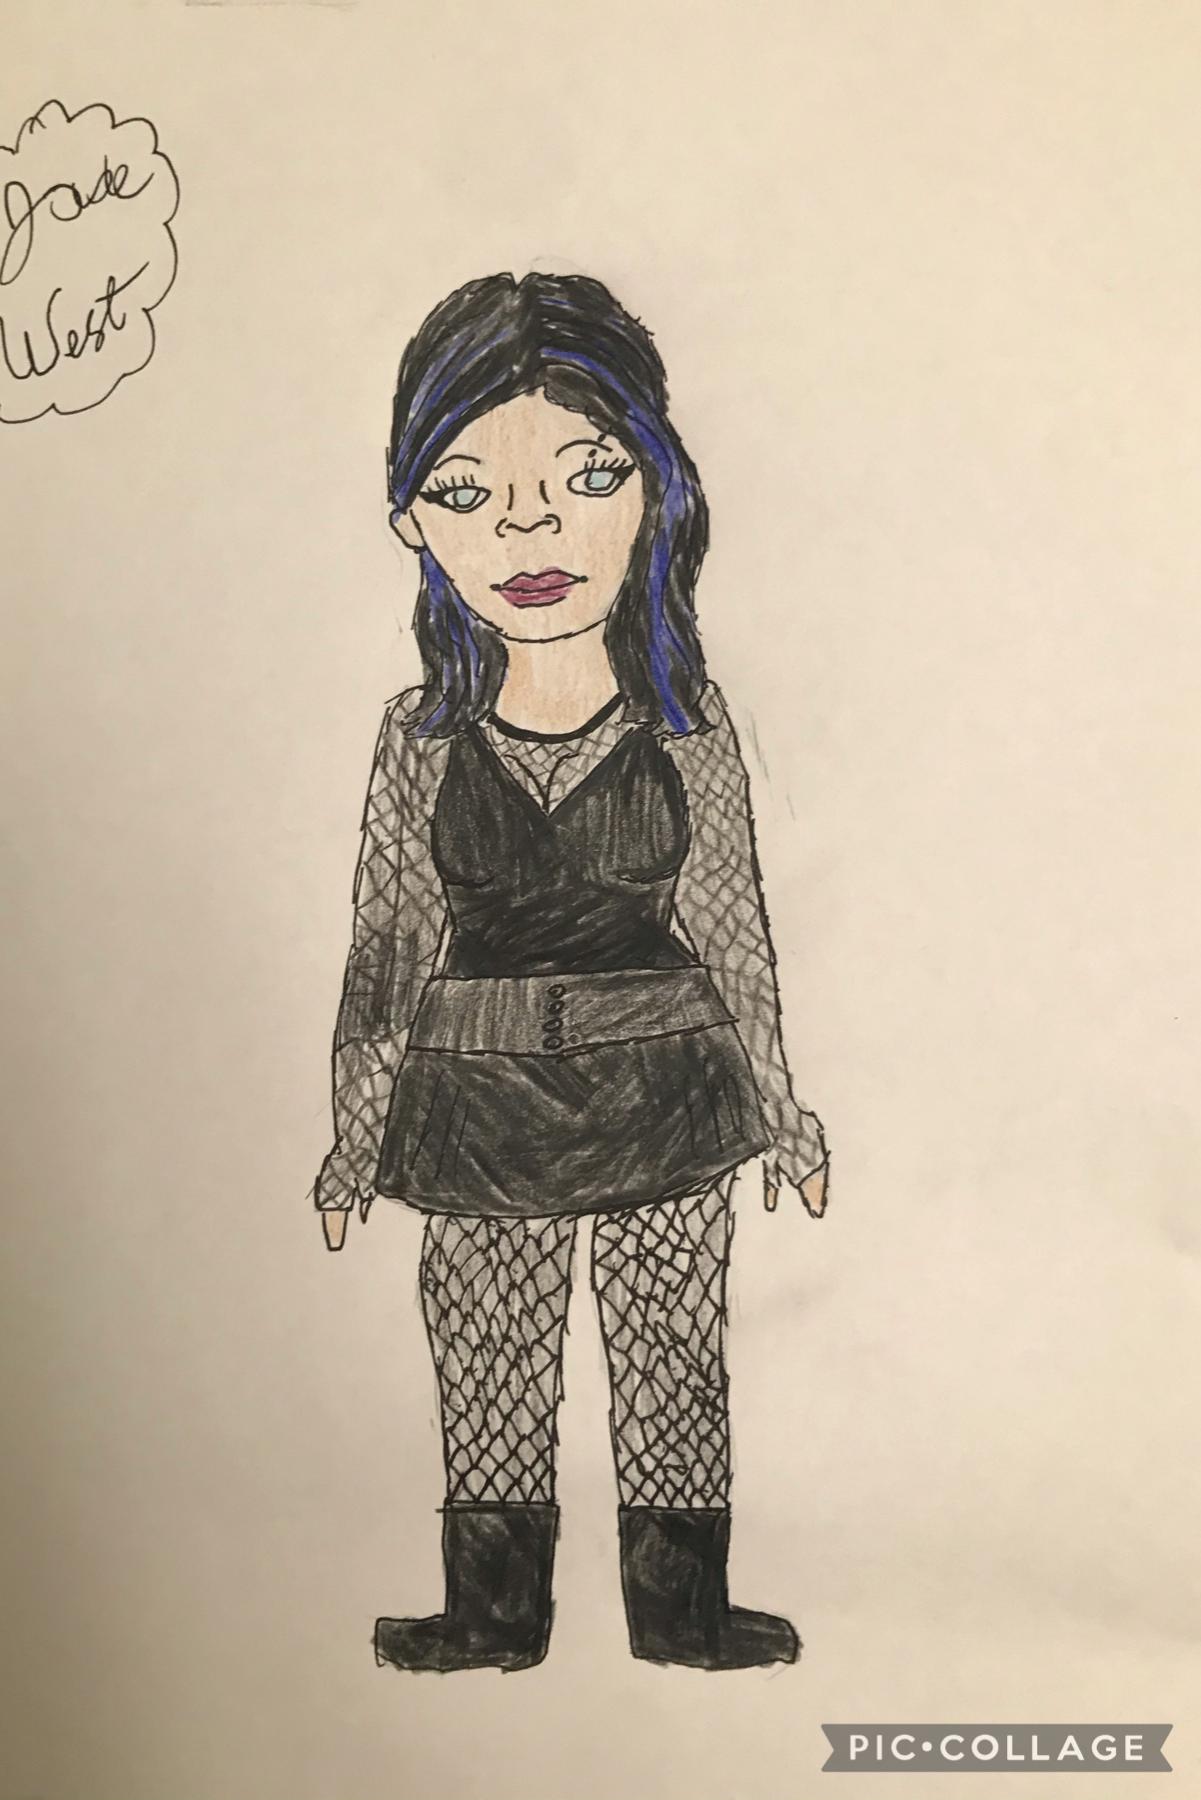 A fun drawing of Jade from Victorious 